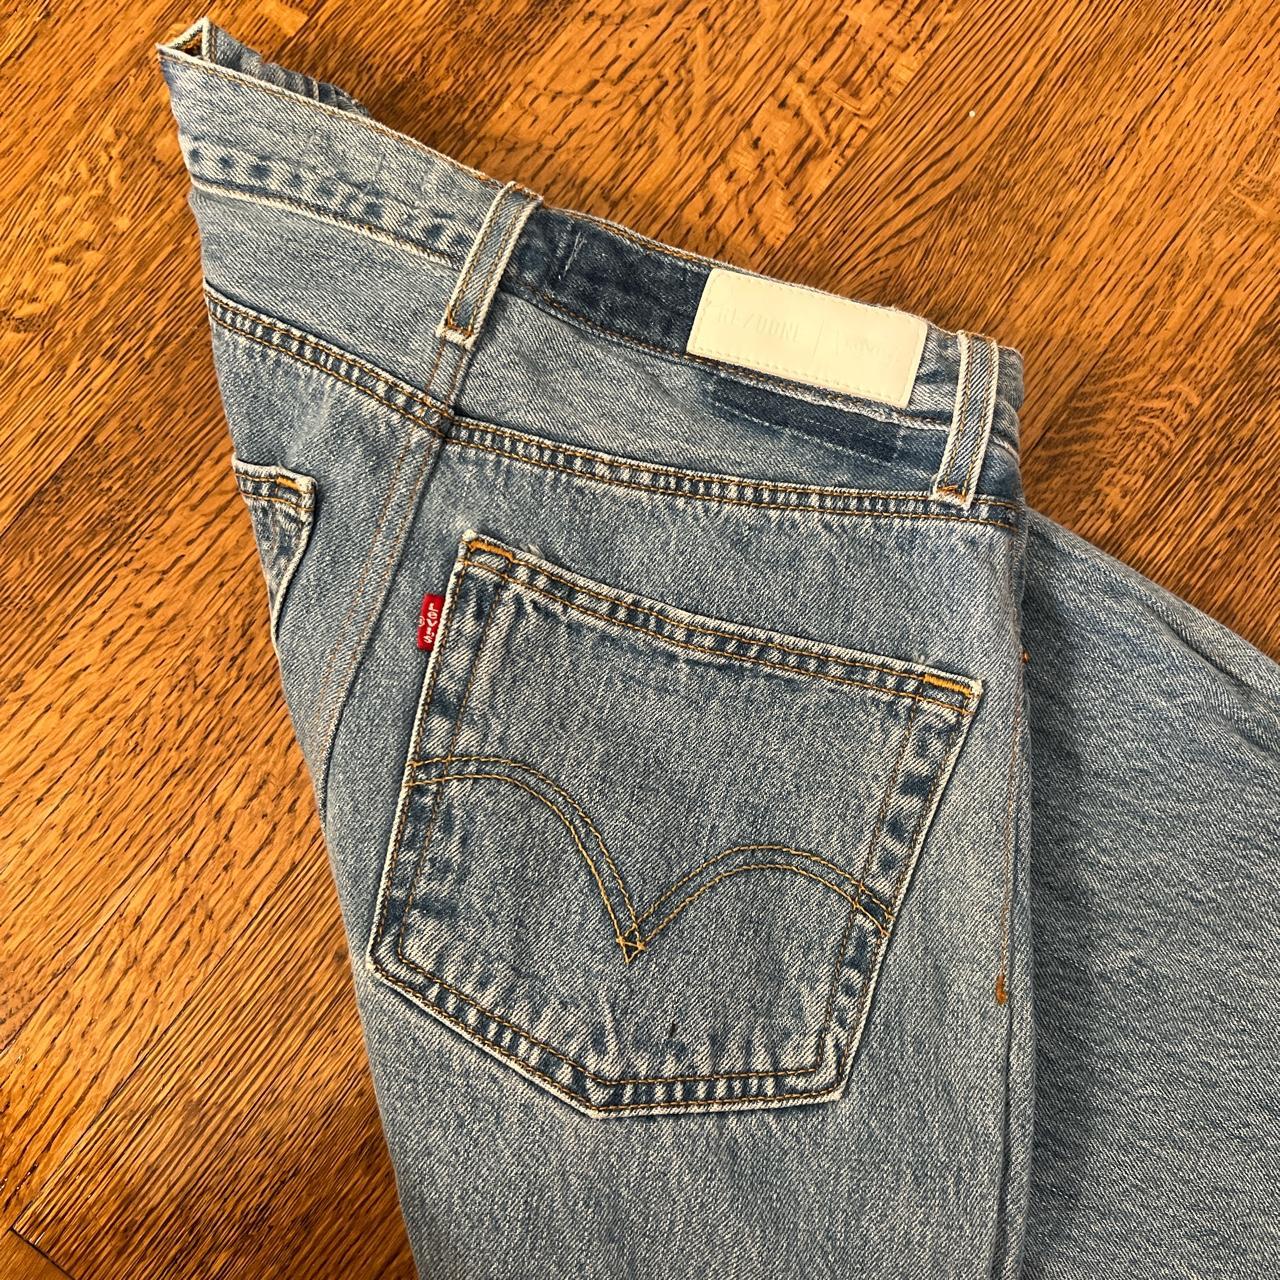 RE/DONE Women's Jeans (4)